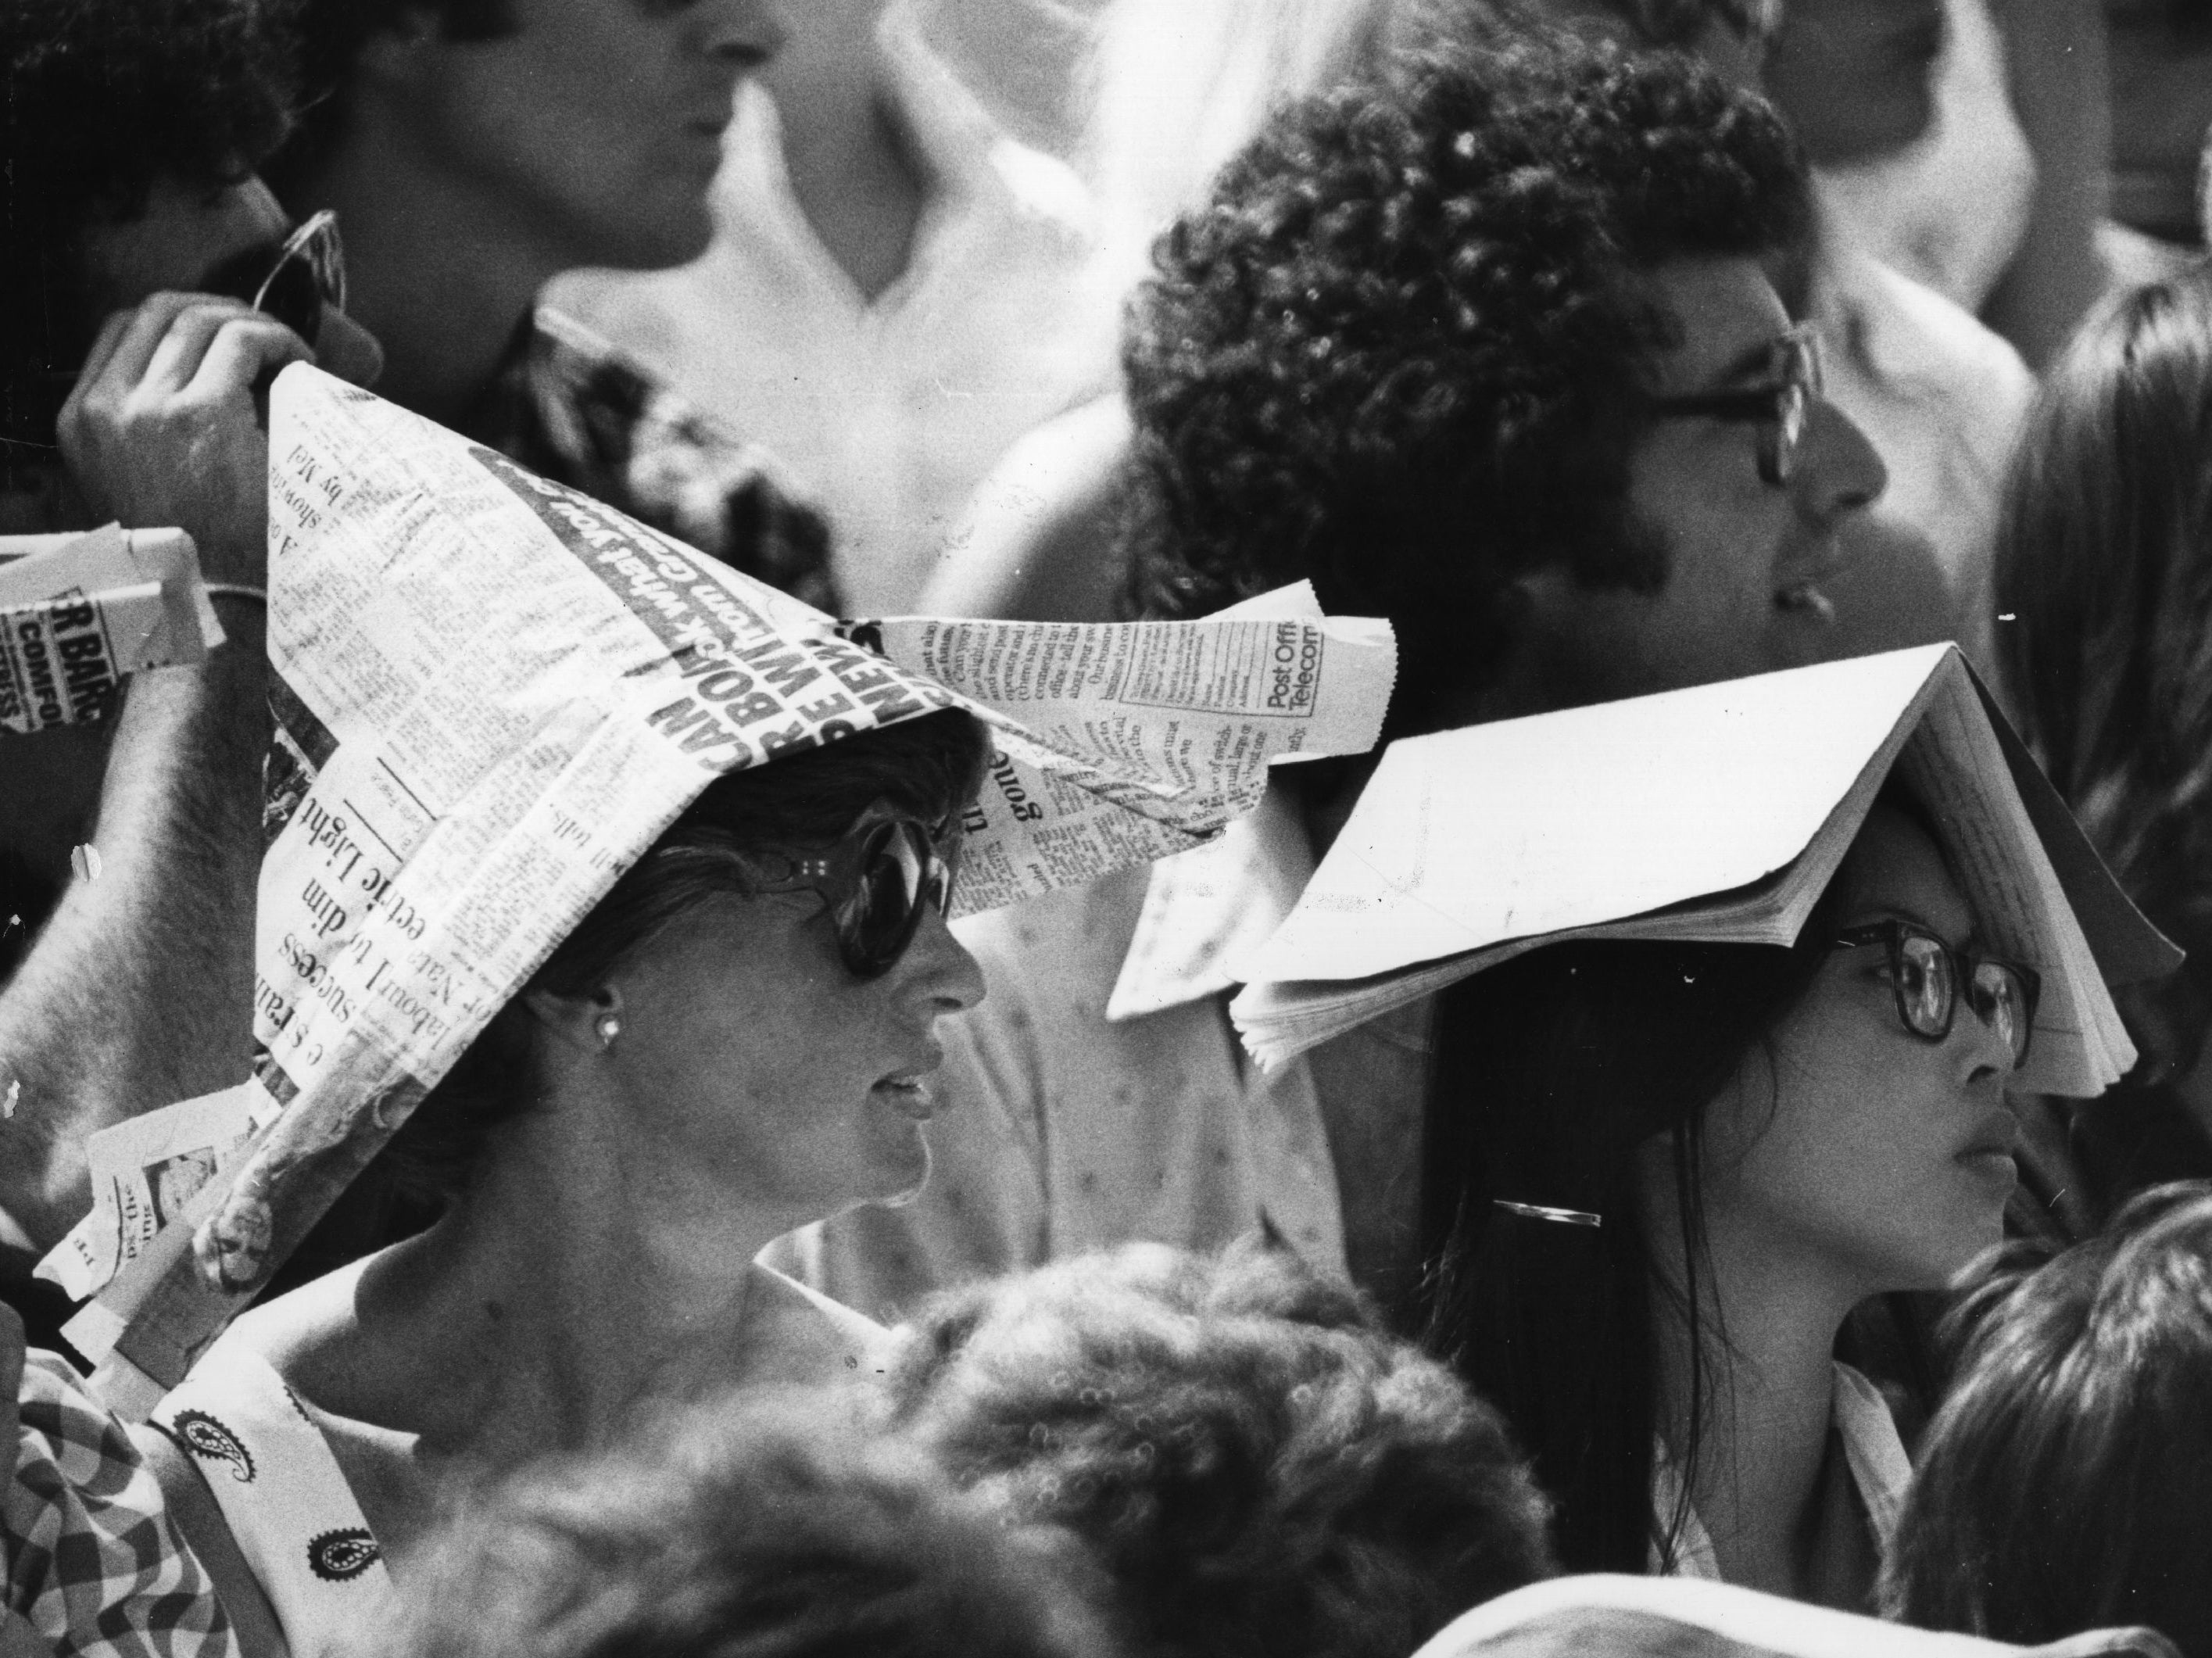 Spectators at Wimbledon protect themselves from the sun wearing newspaper hats and books on their heads during the heatwave